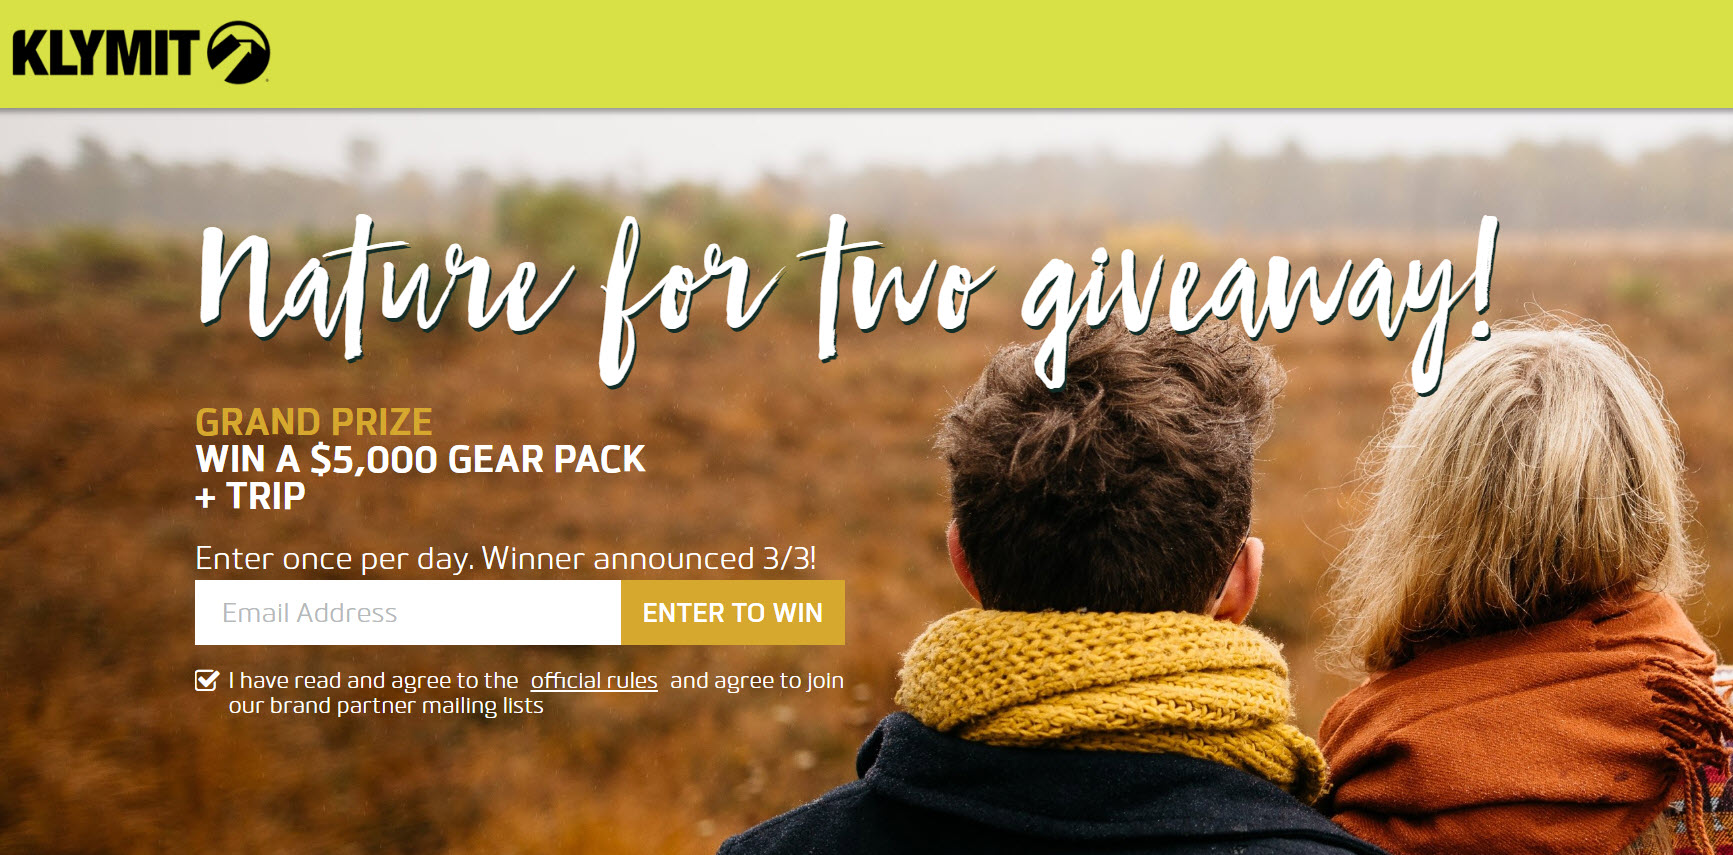 Enter Kylmit's Nature for Two Sweepstakes once a day for your chance to win one of the daily prizes or the grand prize, a Klymit prize package worth over $3,000